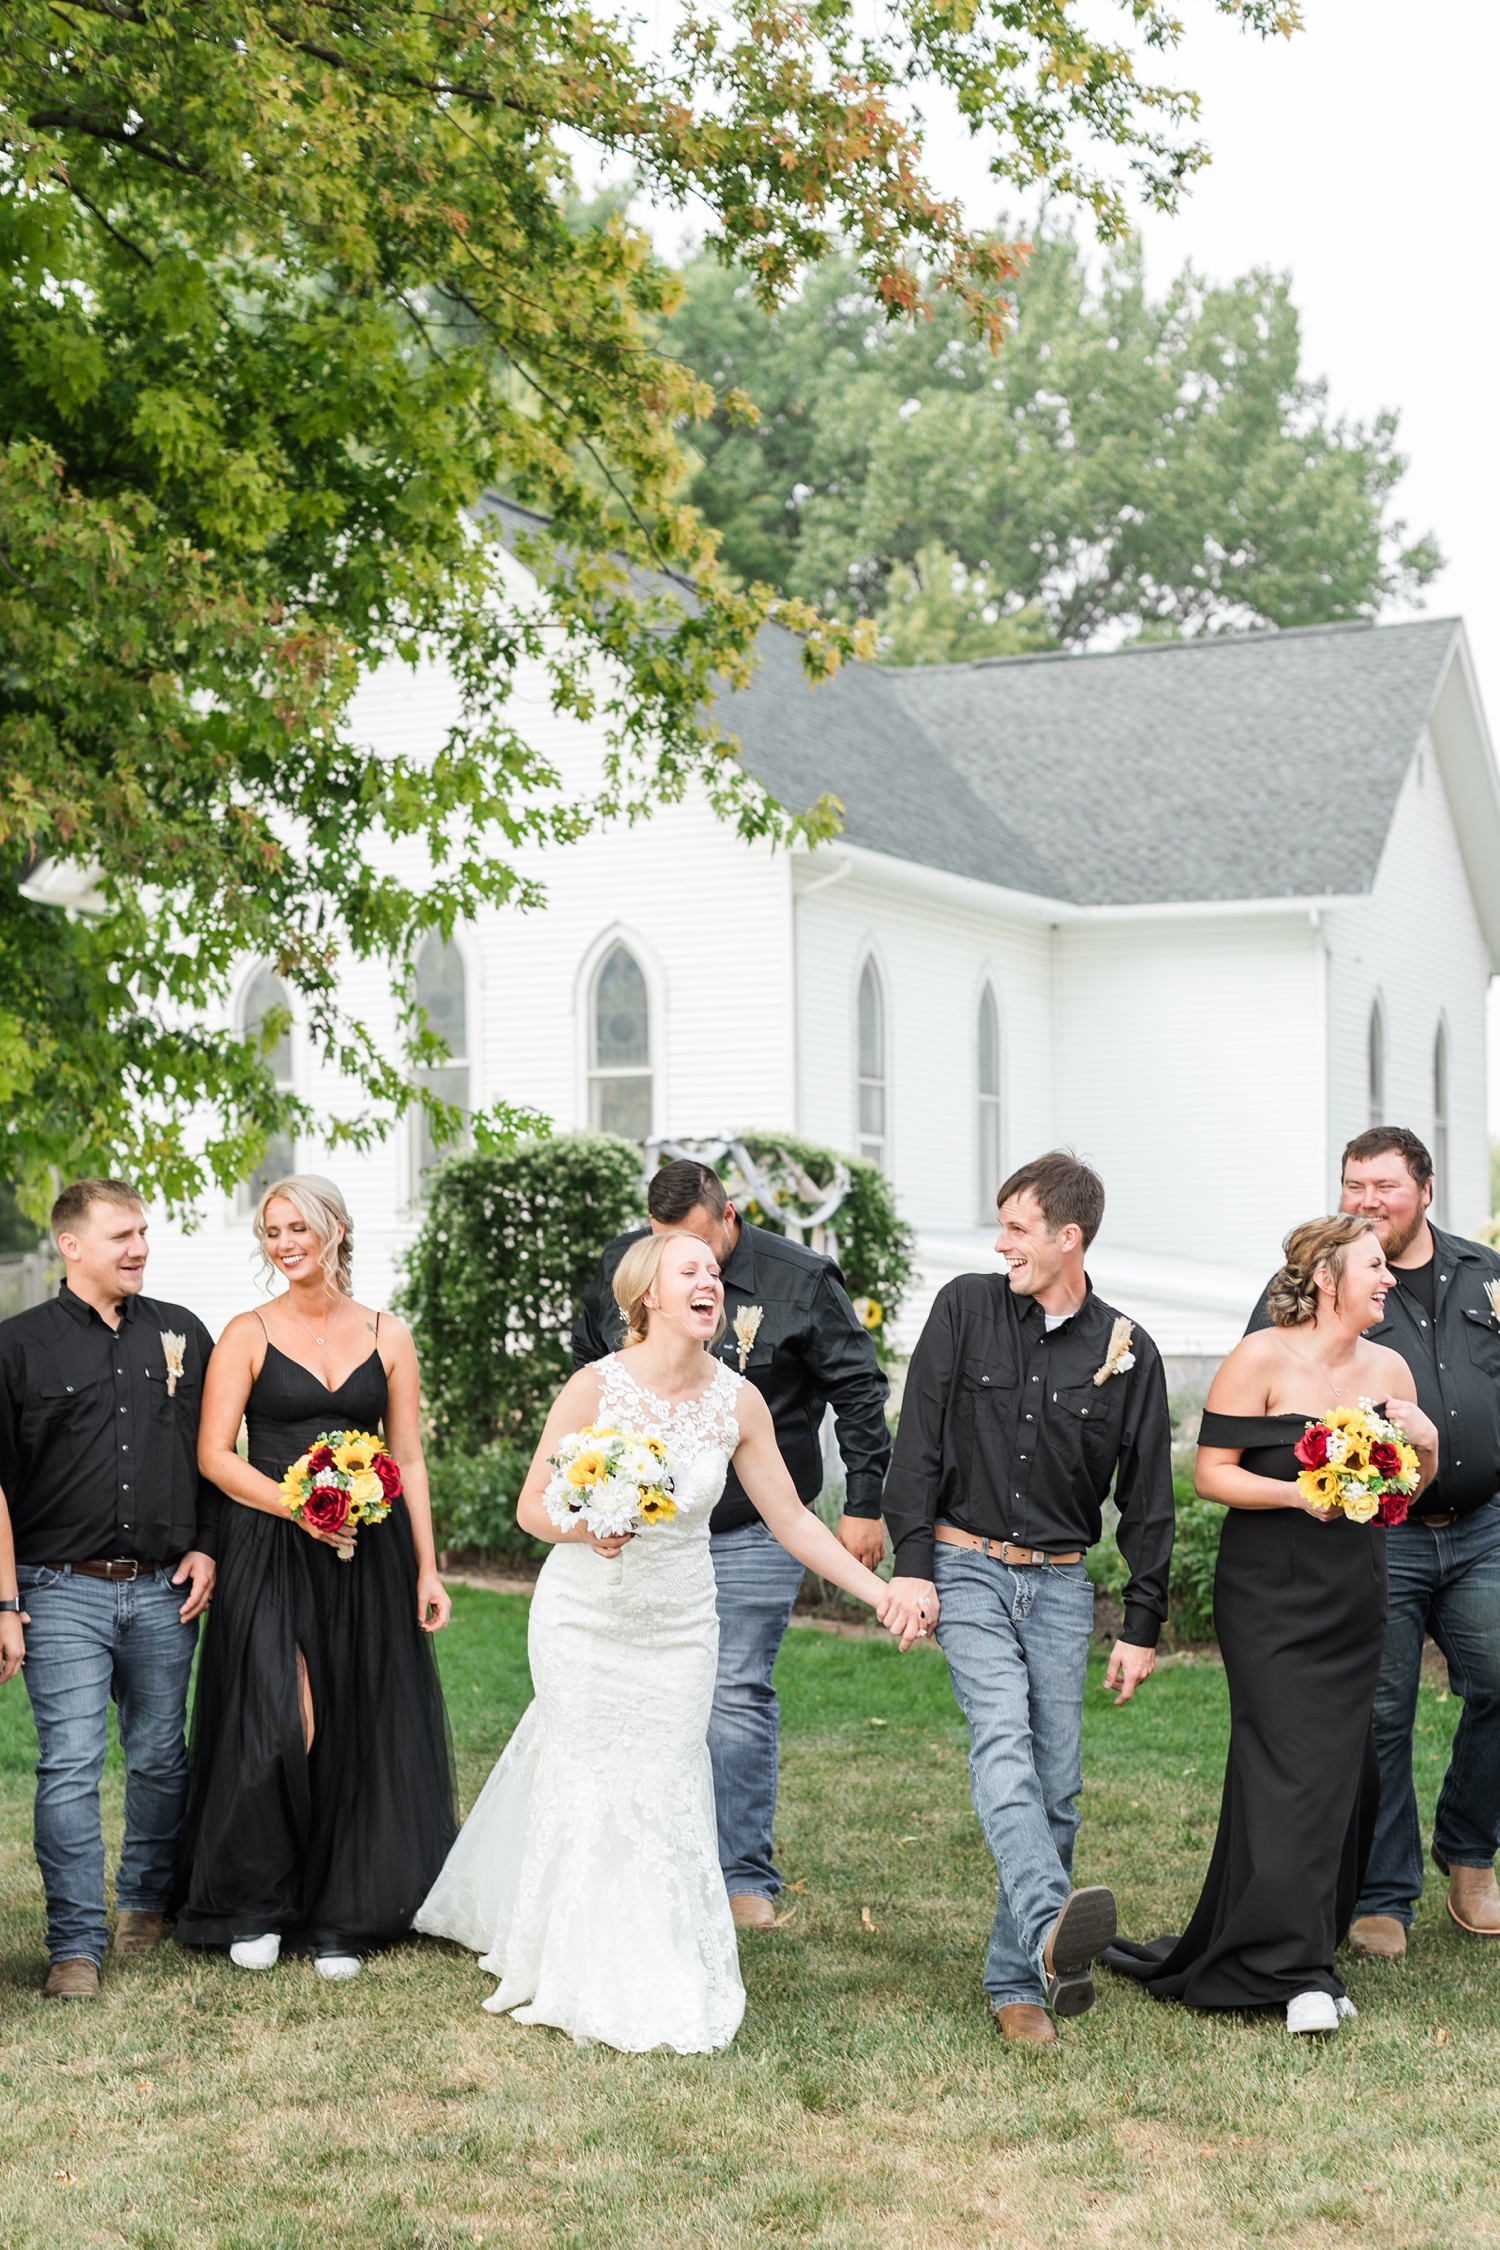 Mckennan and Zane laugh as they walk with their wedding party her in the garden space at the Humboldt County Museum with the Hardy church in the background | CB Studio